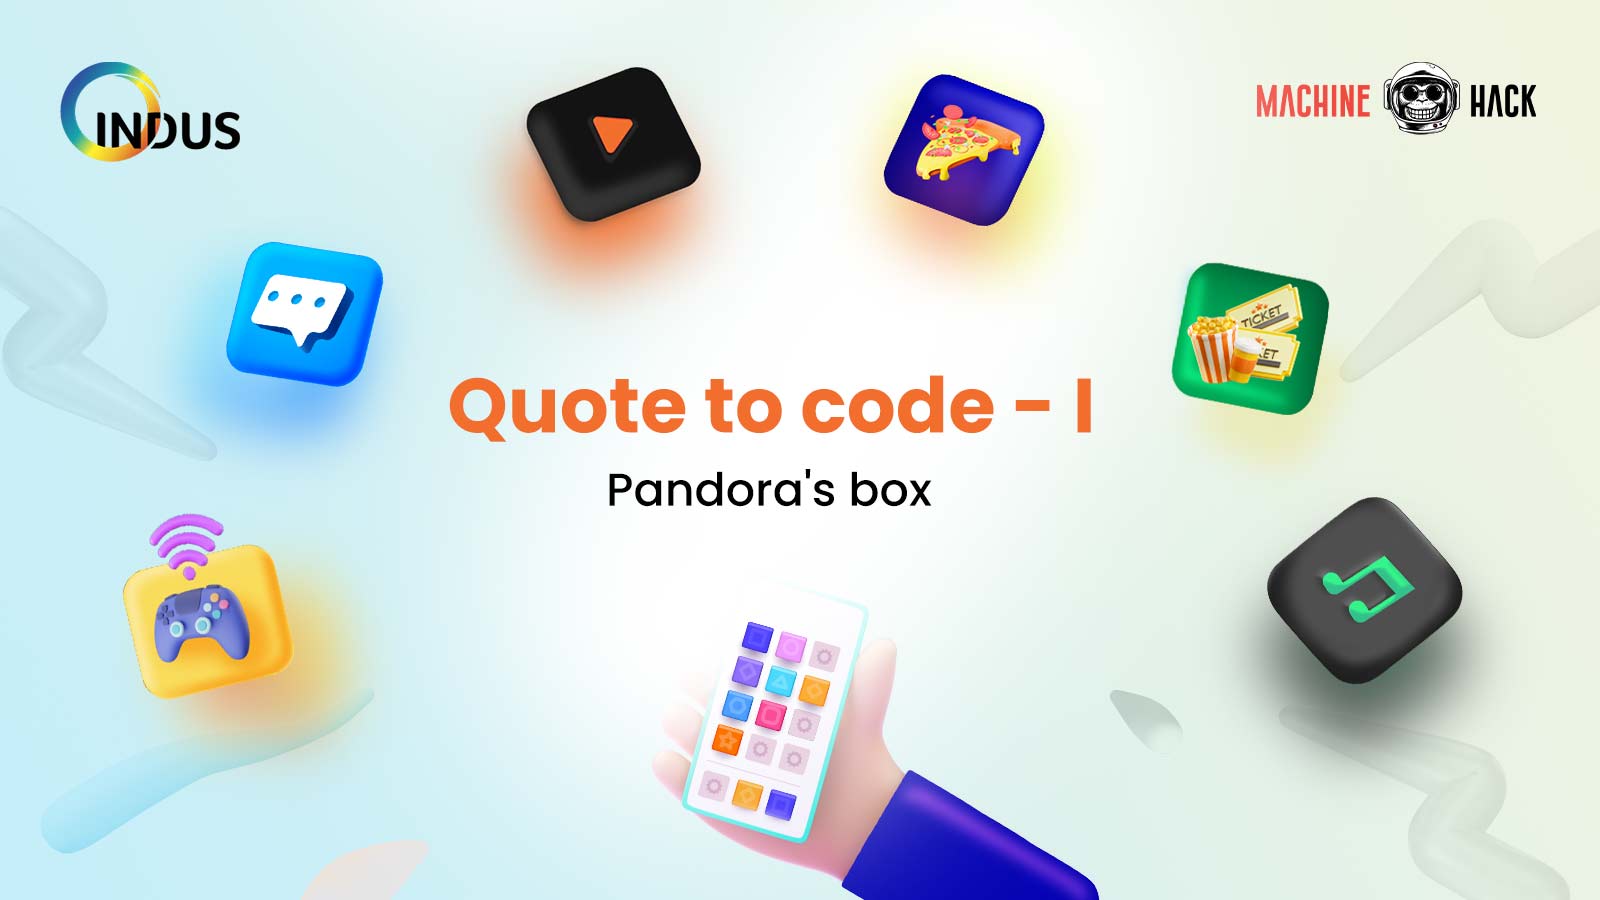 Participate in ‘Quote to code I: Pandora's box’ and get a chance to win cash prizes & opportunity to work with Indus OS